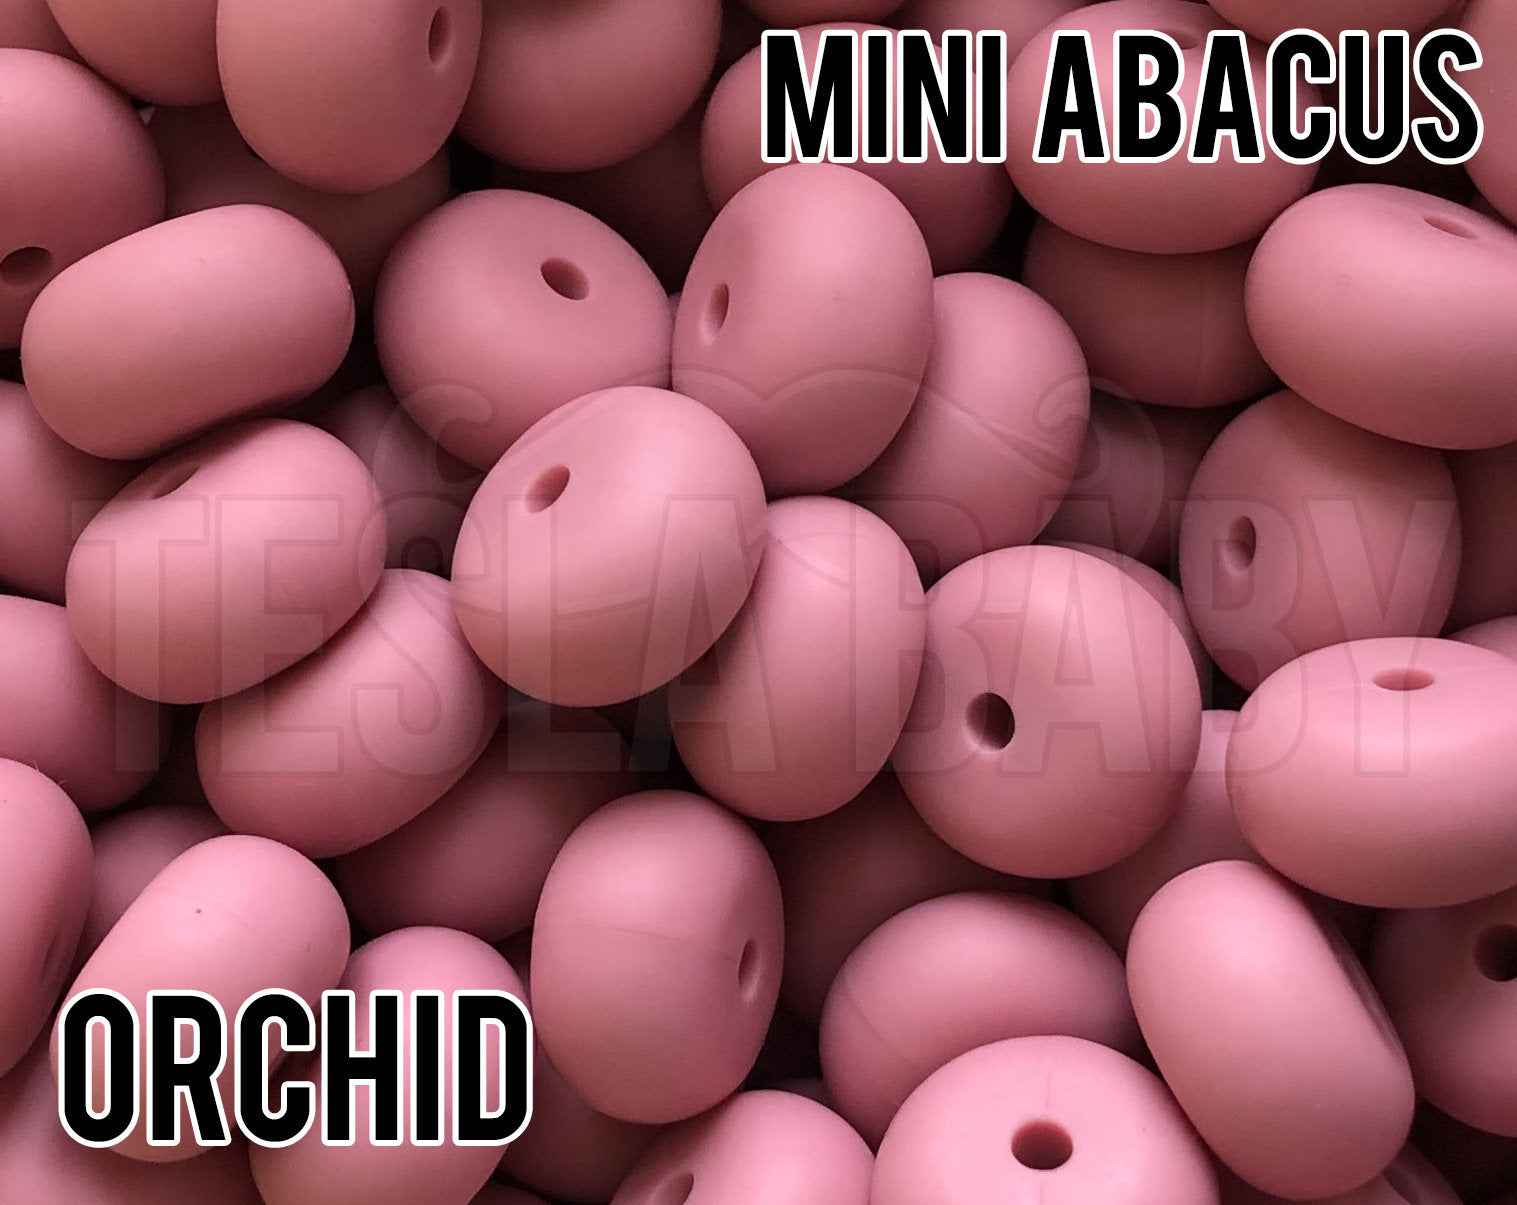 Mini Abacus Orchid Silicone Beads 5-1,000 (aka Medium Pink) Wholesale Silicone Beads